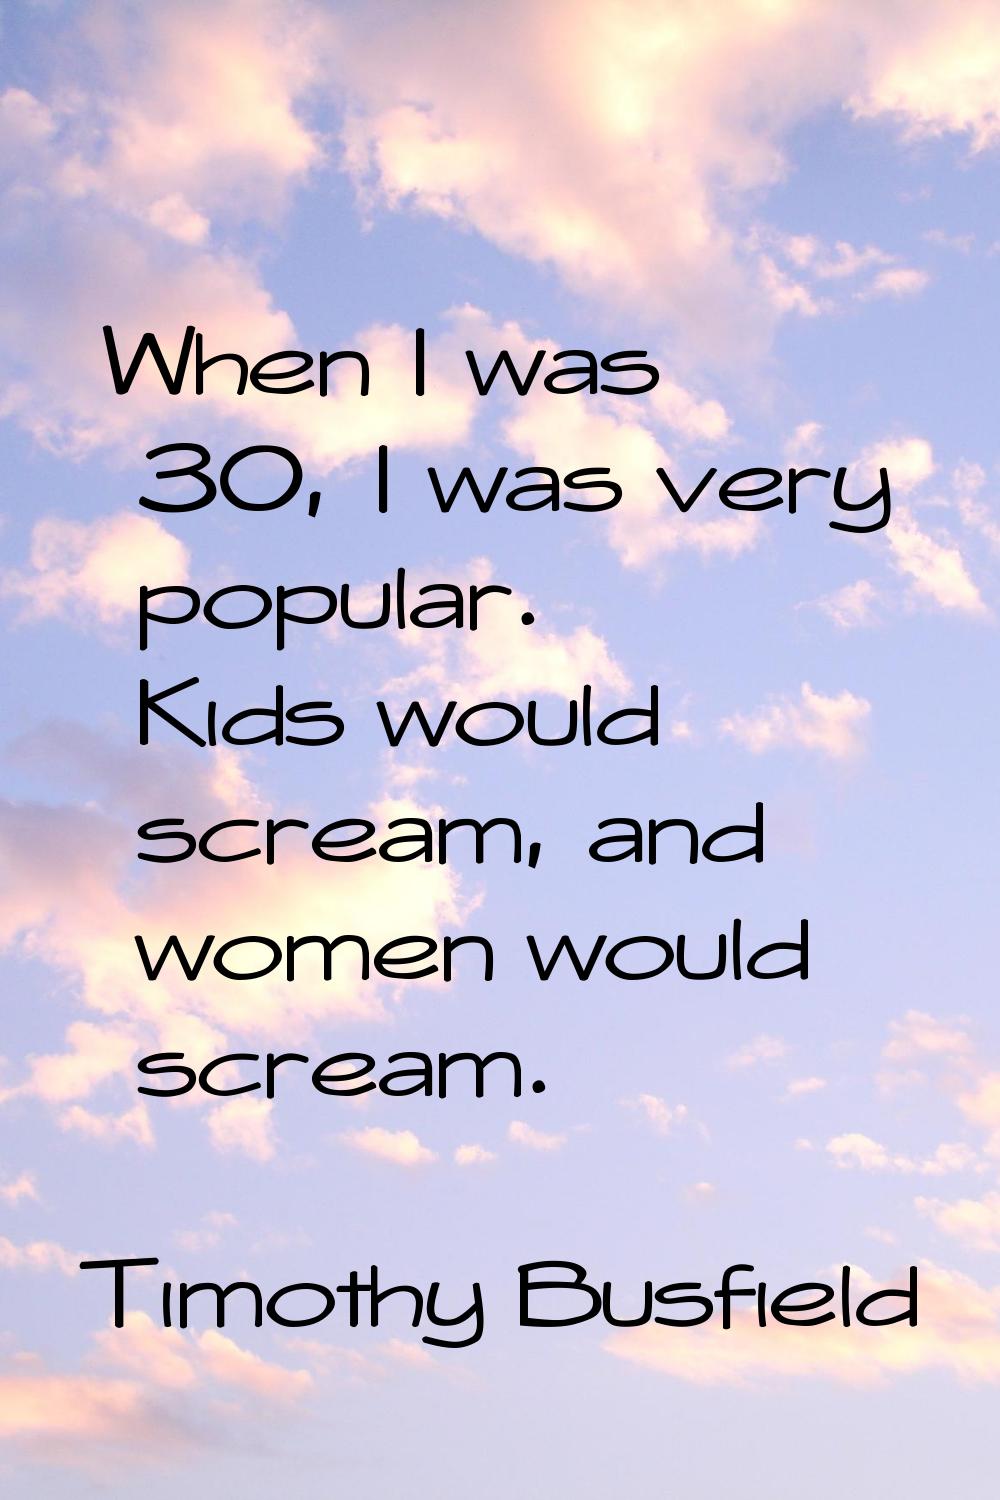 When I was 30, I was very popular. Kids would scream, and women would scream.